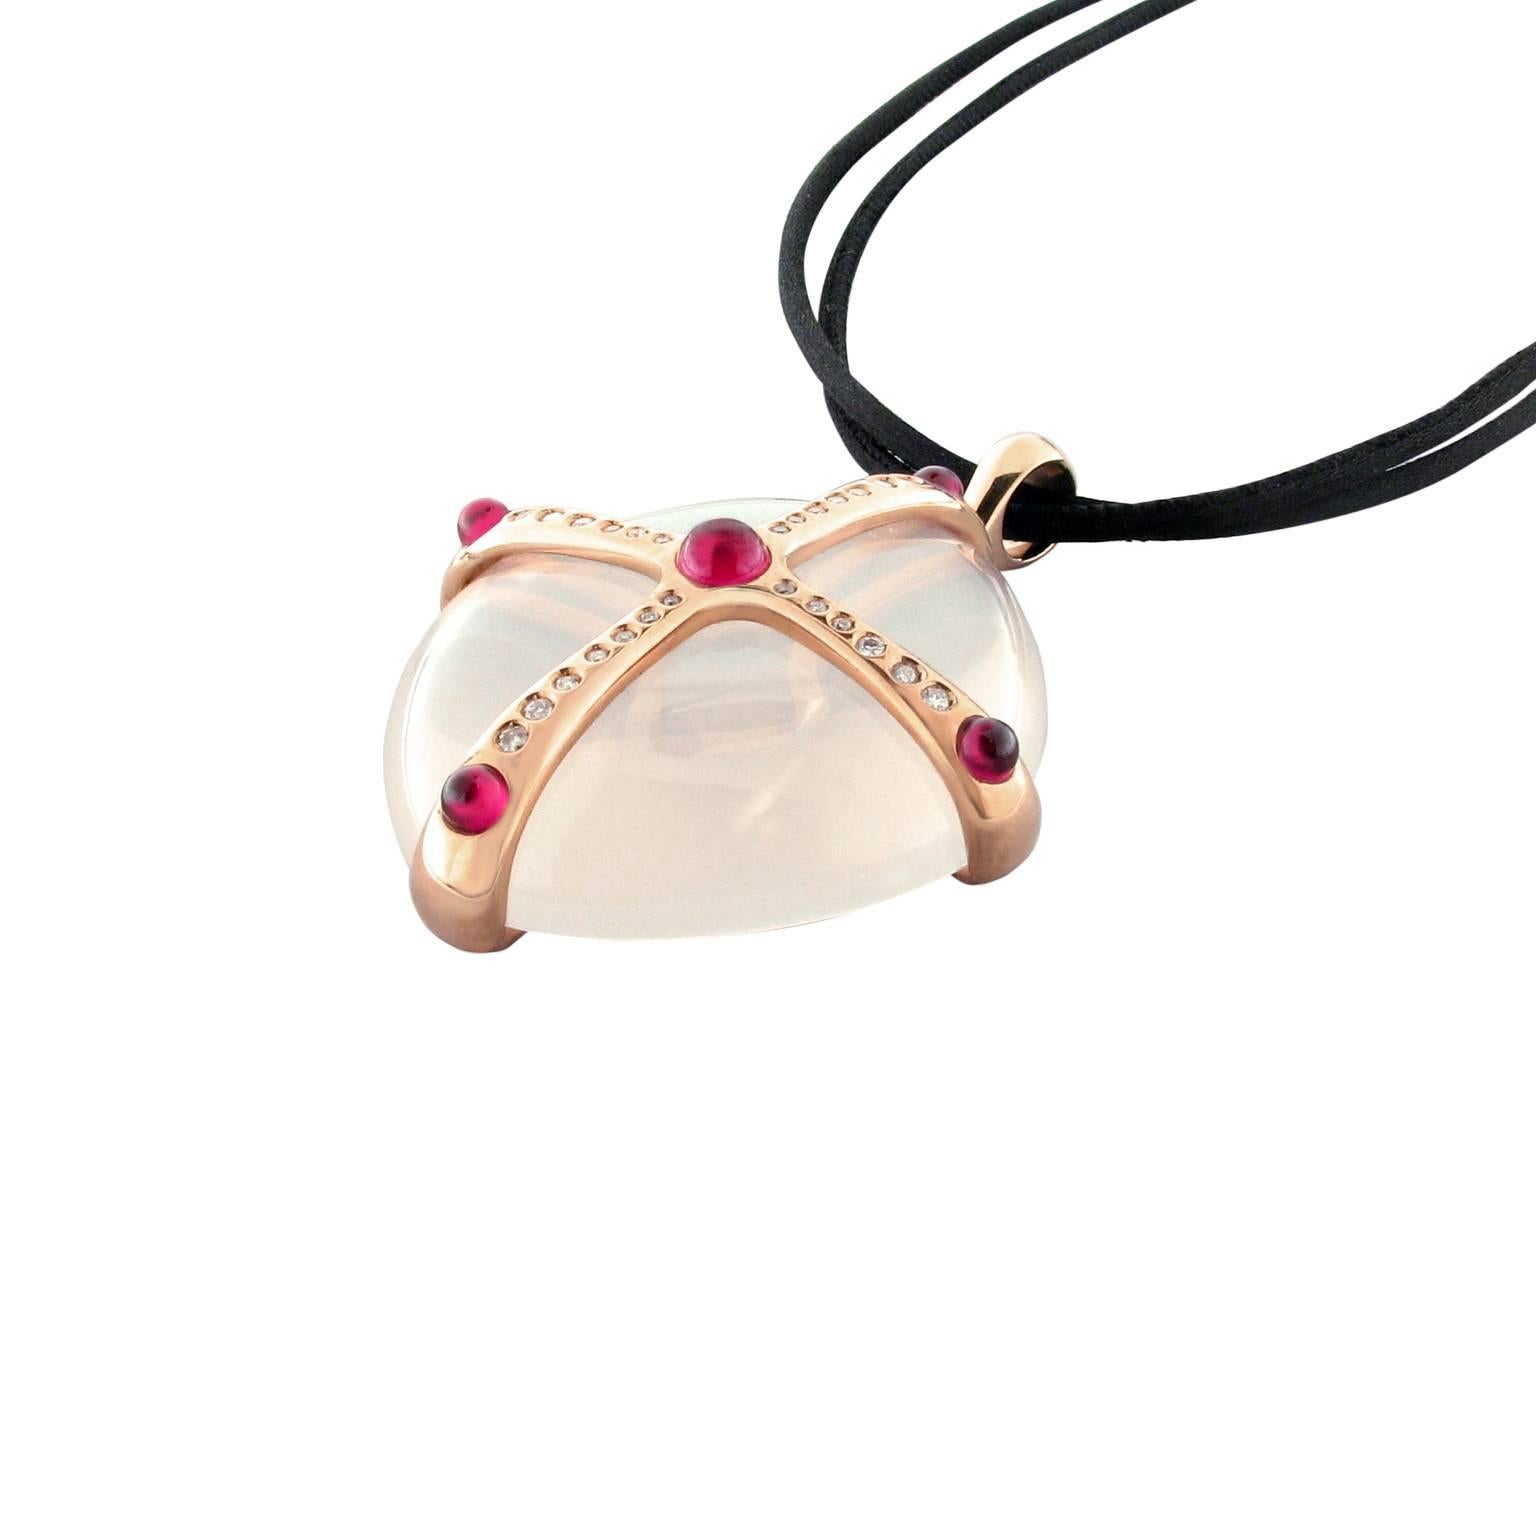 Contemporary sculptured pendant in 18k rose gold. The jewel features a custom cut milky rock crystal with rubies and white diamonds.
Signed and hallmarked Gavello. 
The brand is known for its impeccable craftsmanship and signature sophisticated,